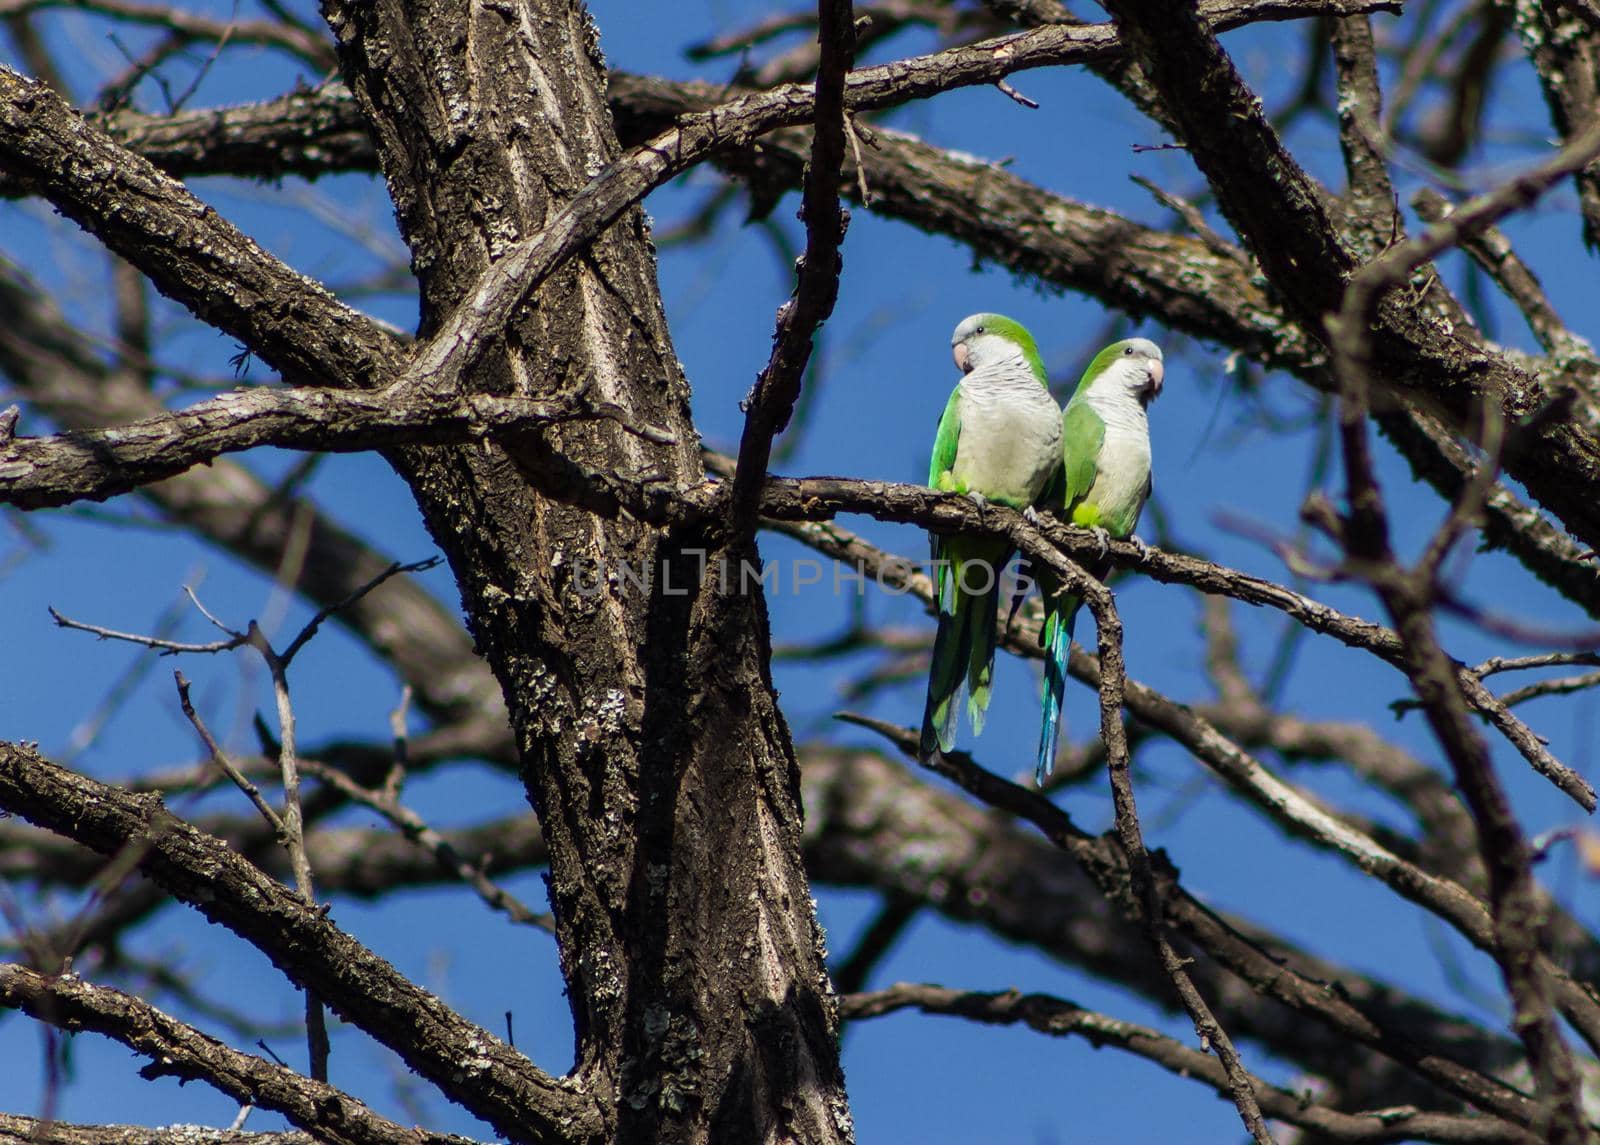 pair of Argentine parrots perched on tree branches in their natural habitat